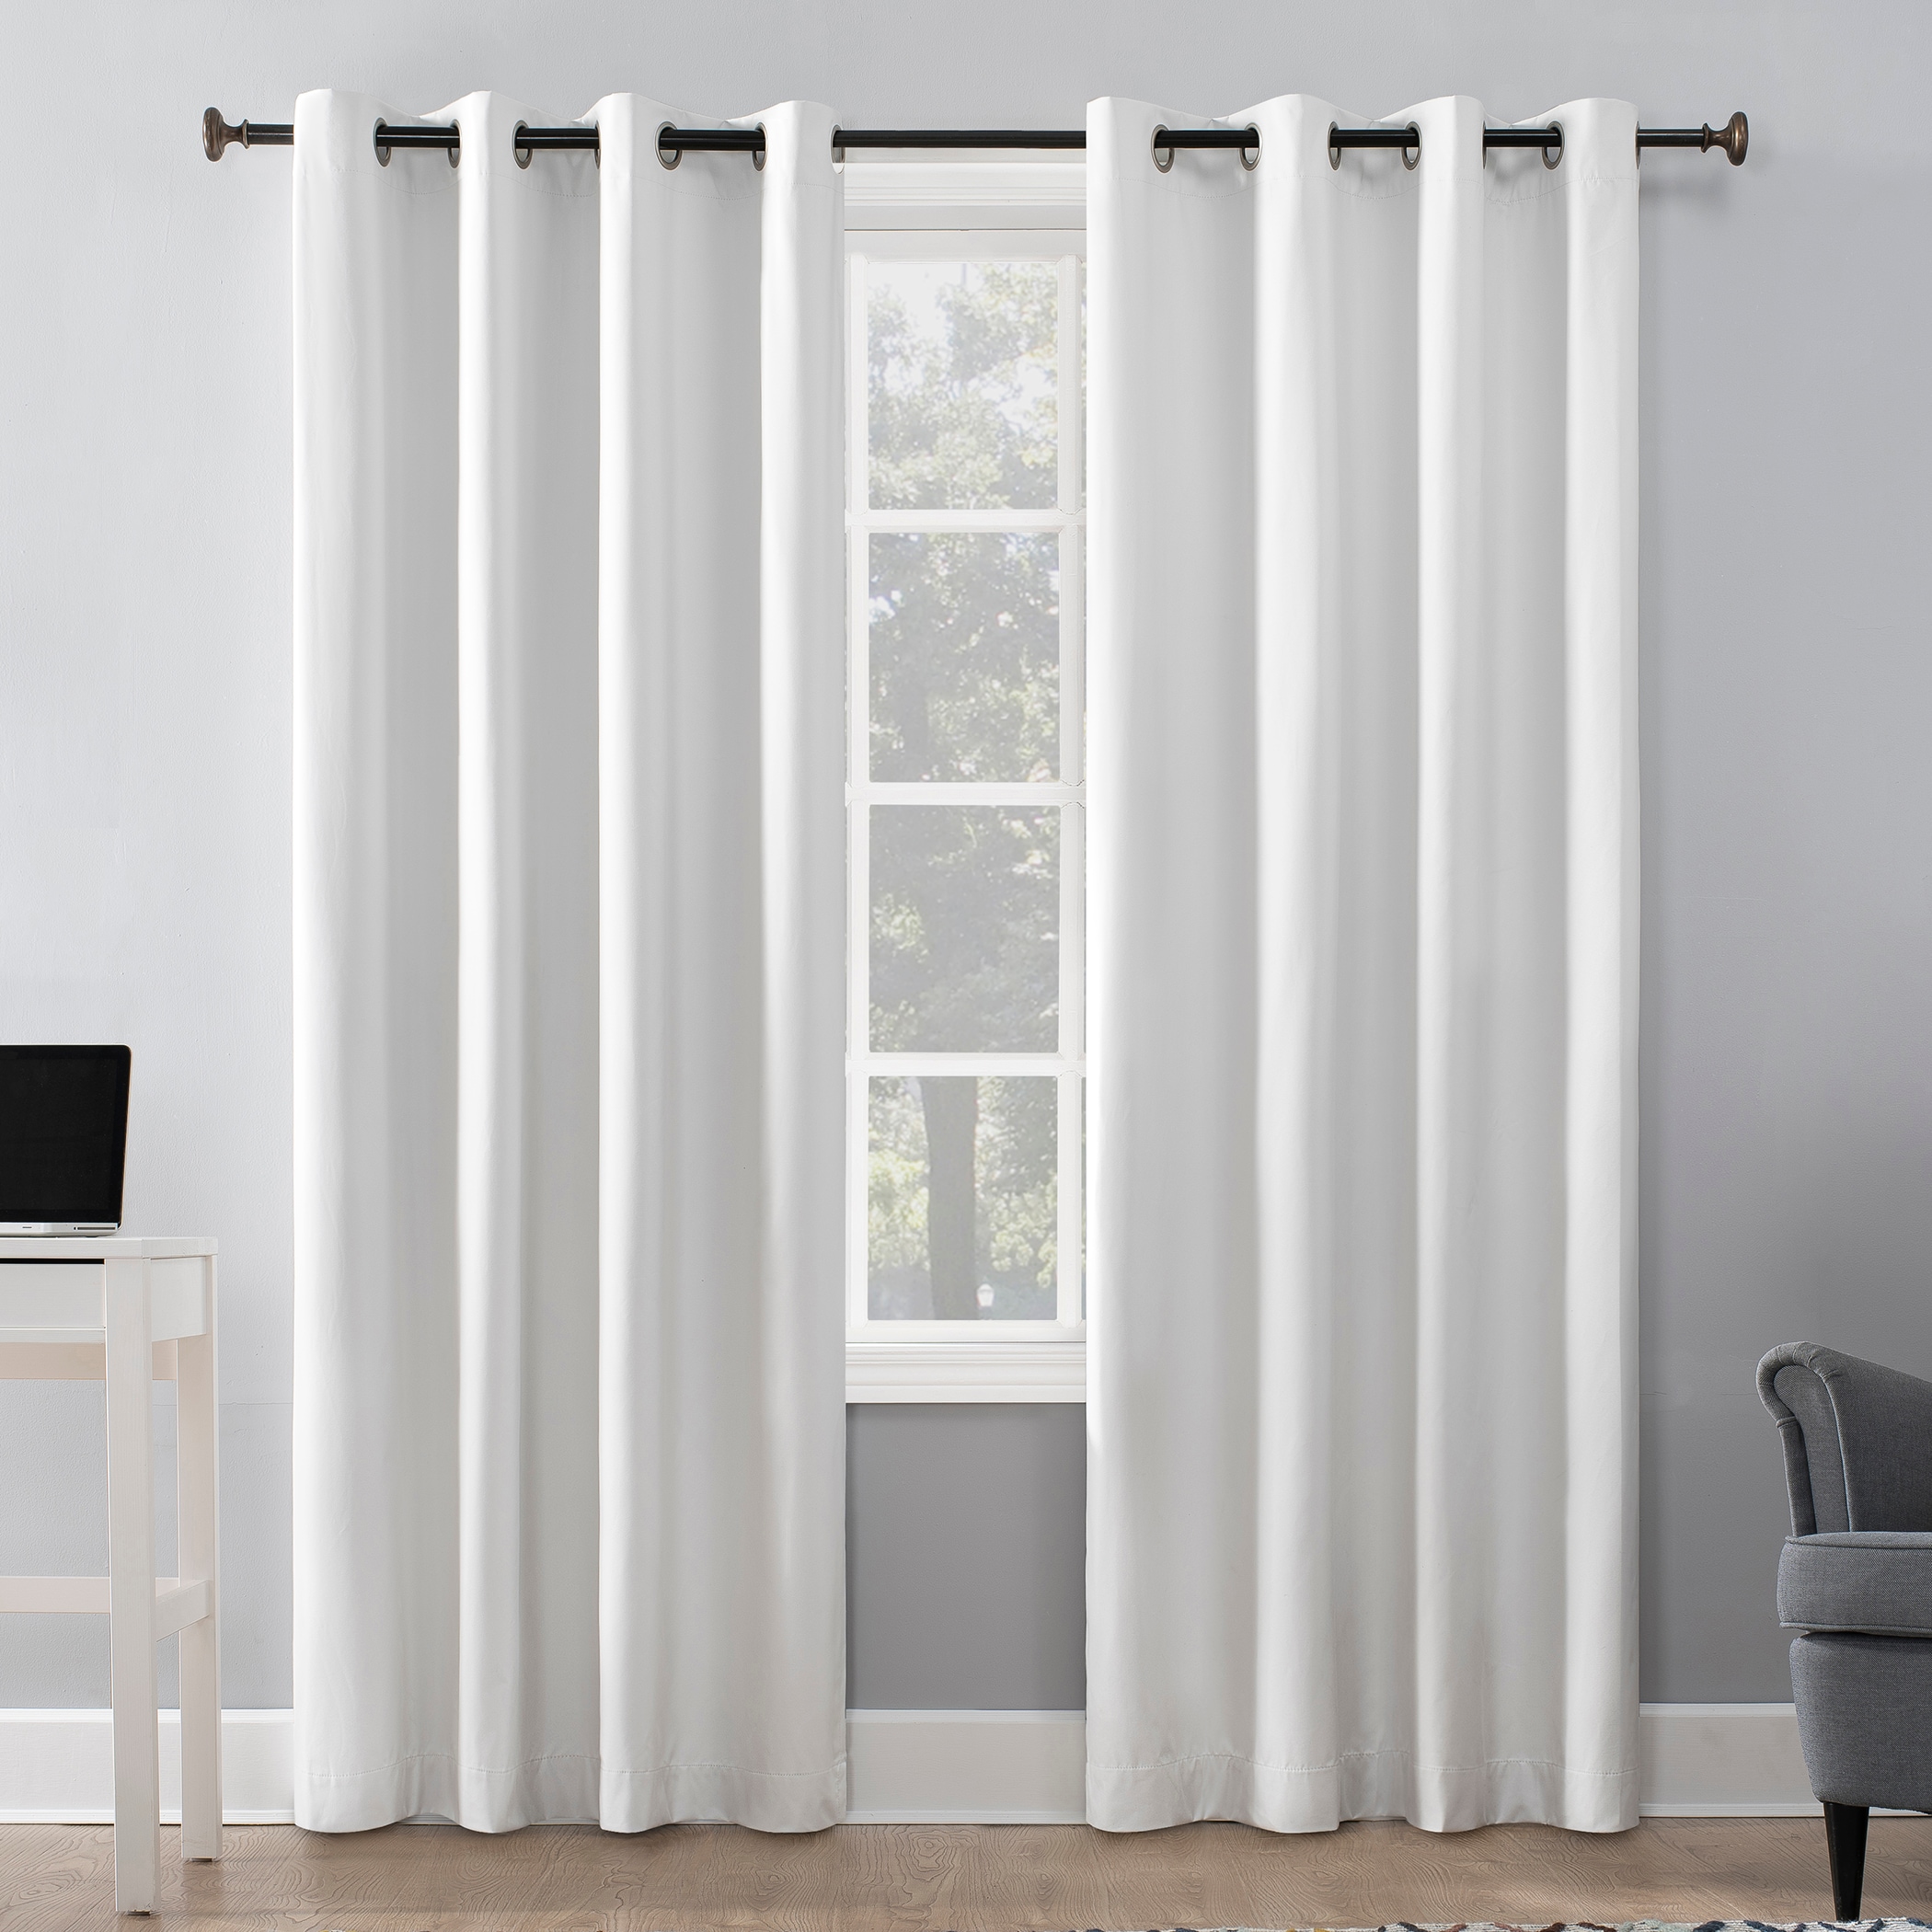 2 Panel 3D Printed Window Curtain Blackout Blinds Thermal Insulated Door  H M 